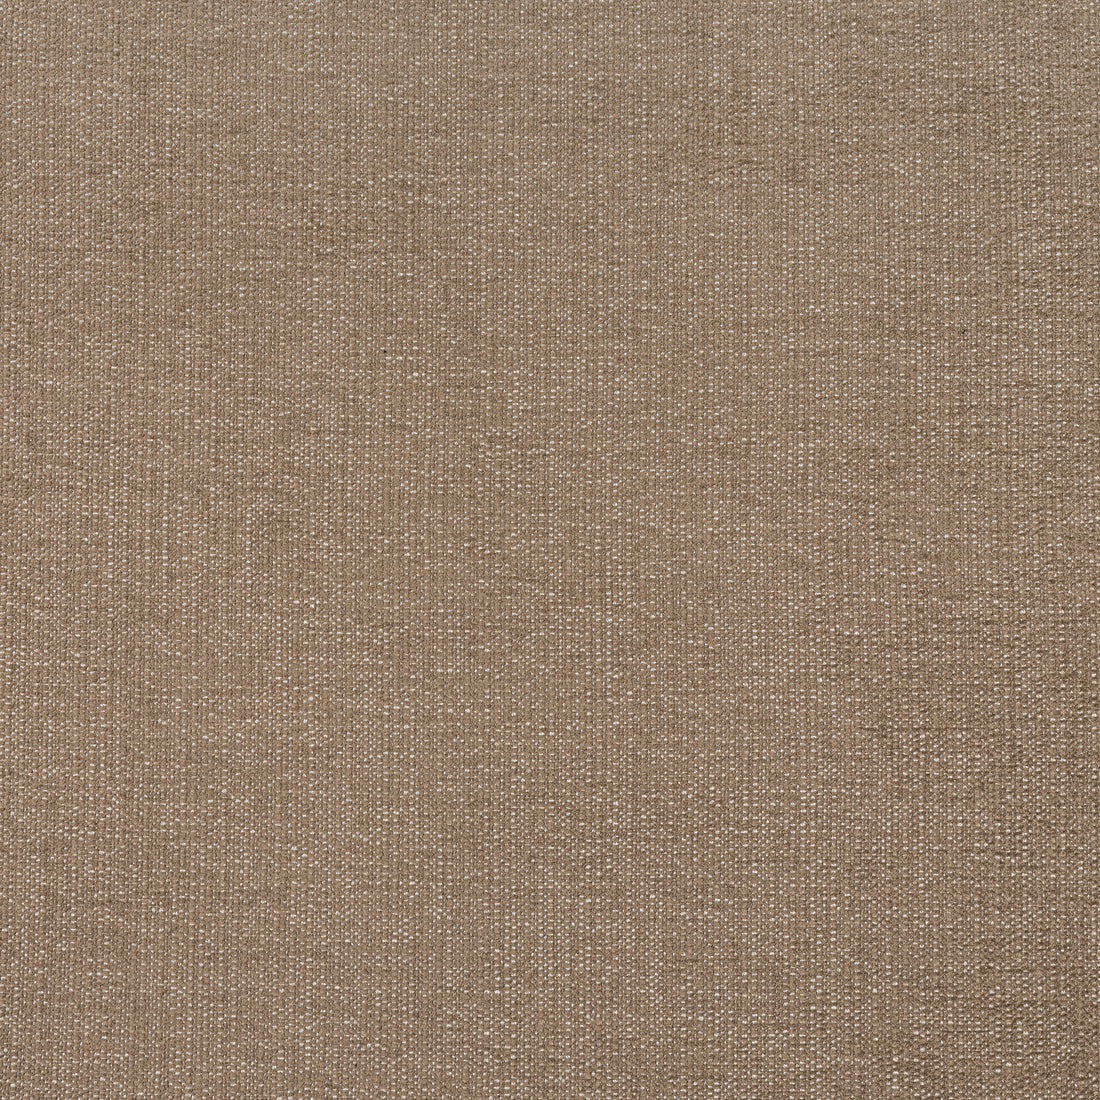 Veda fabric in cafe color - pattern number W8712 - by Thibaut in the Haven Textures collection